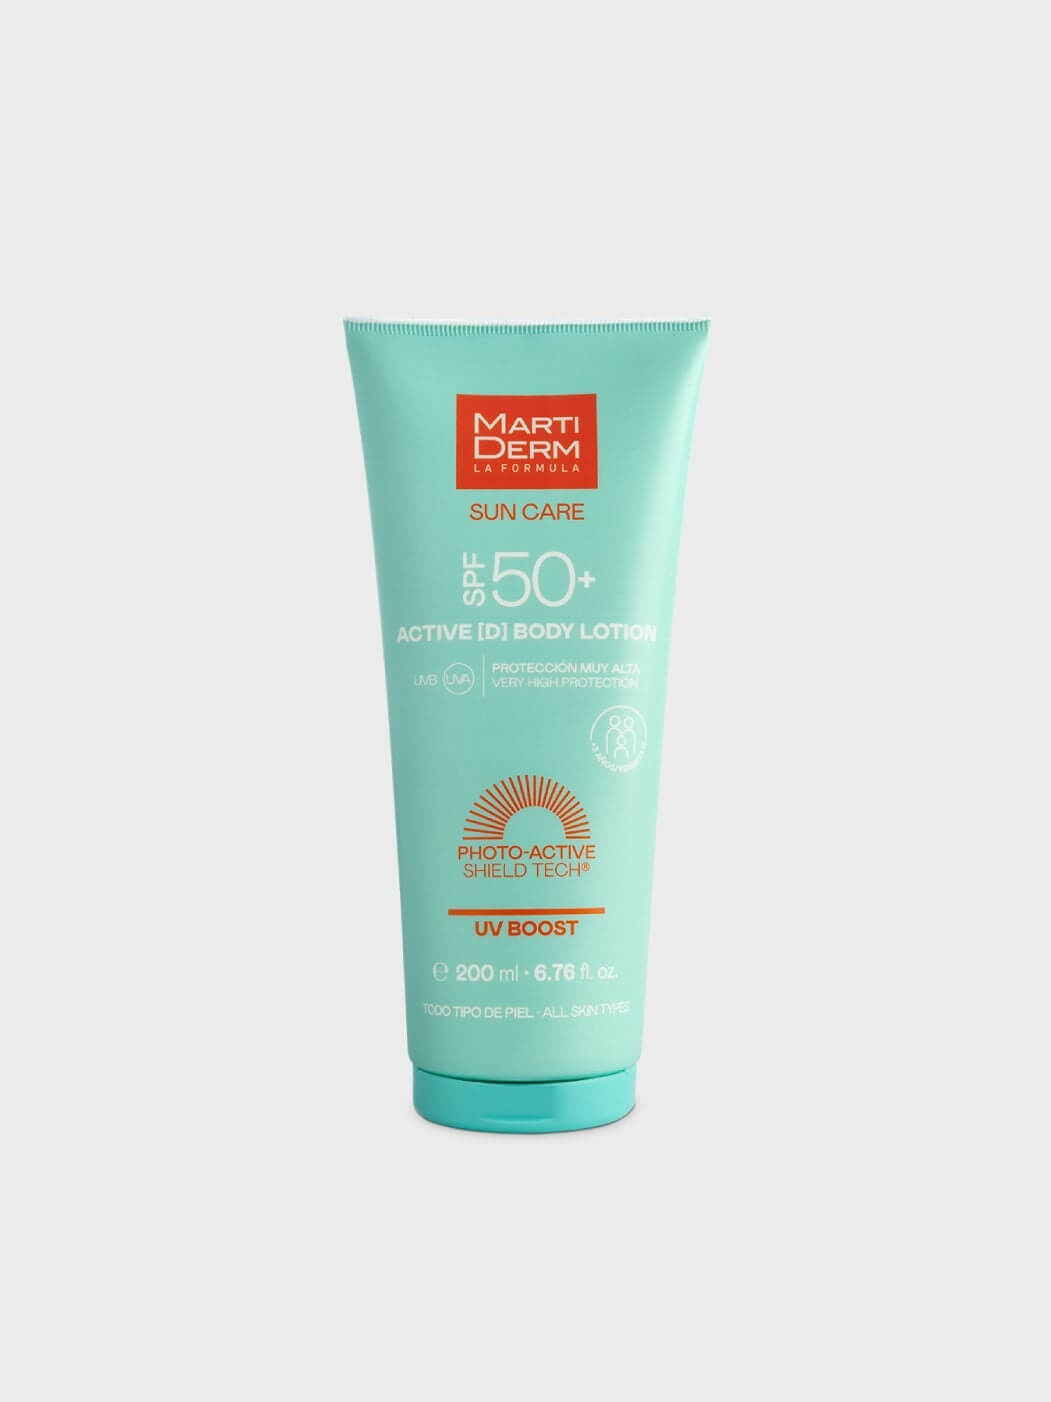 SPF50+ ACTIVE [D] BODY LOTION